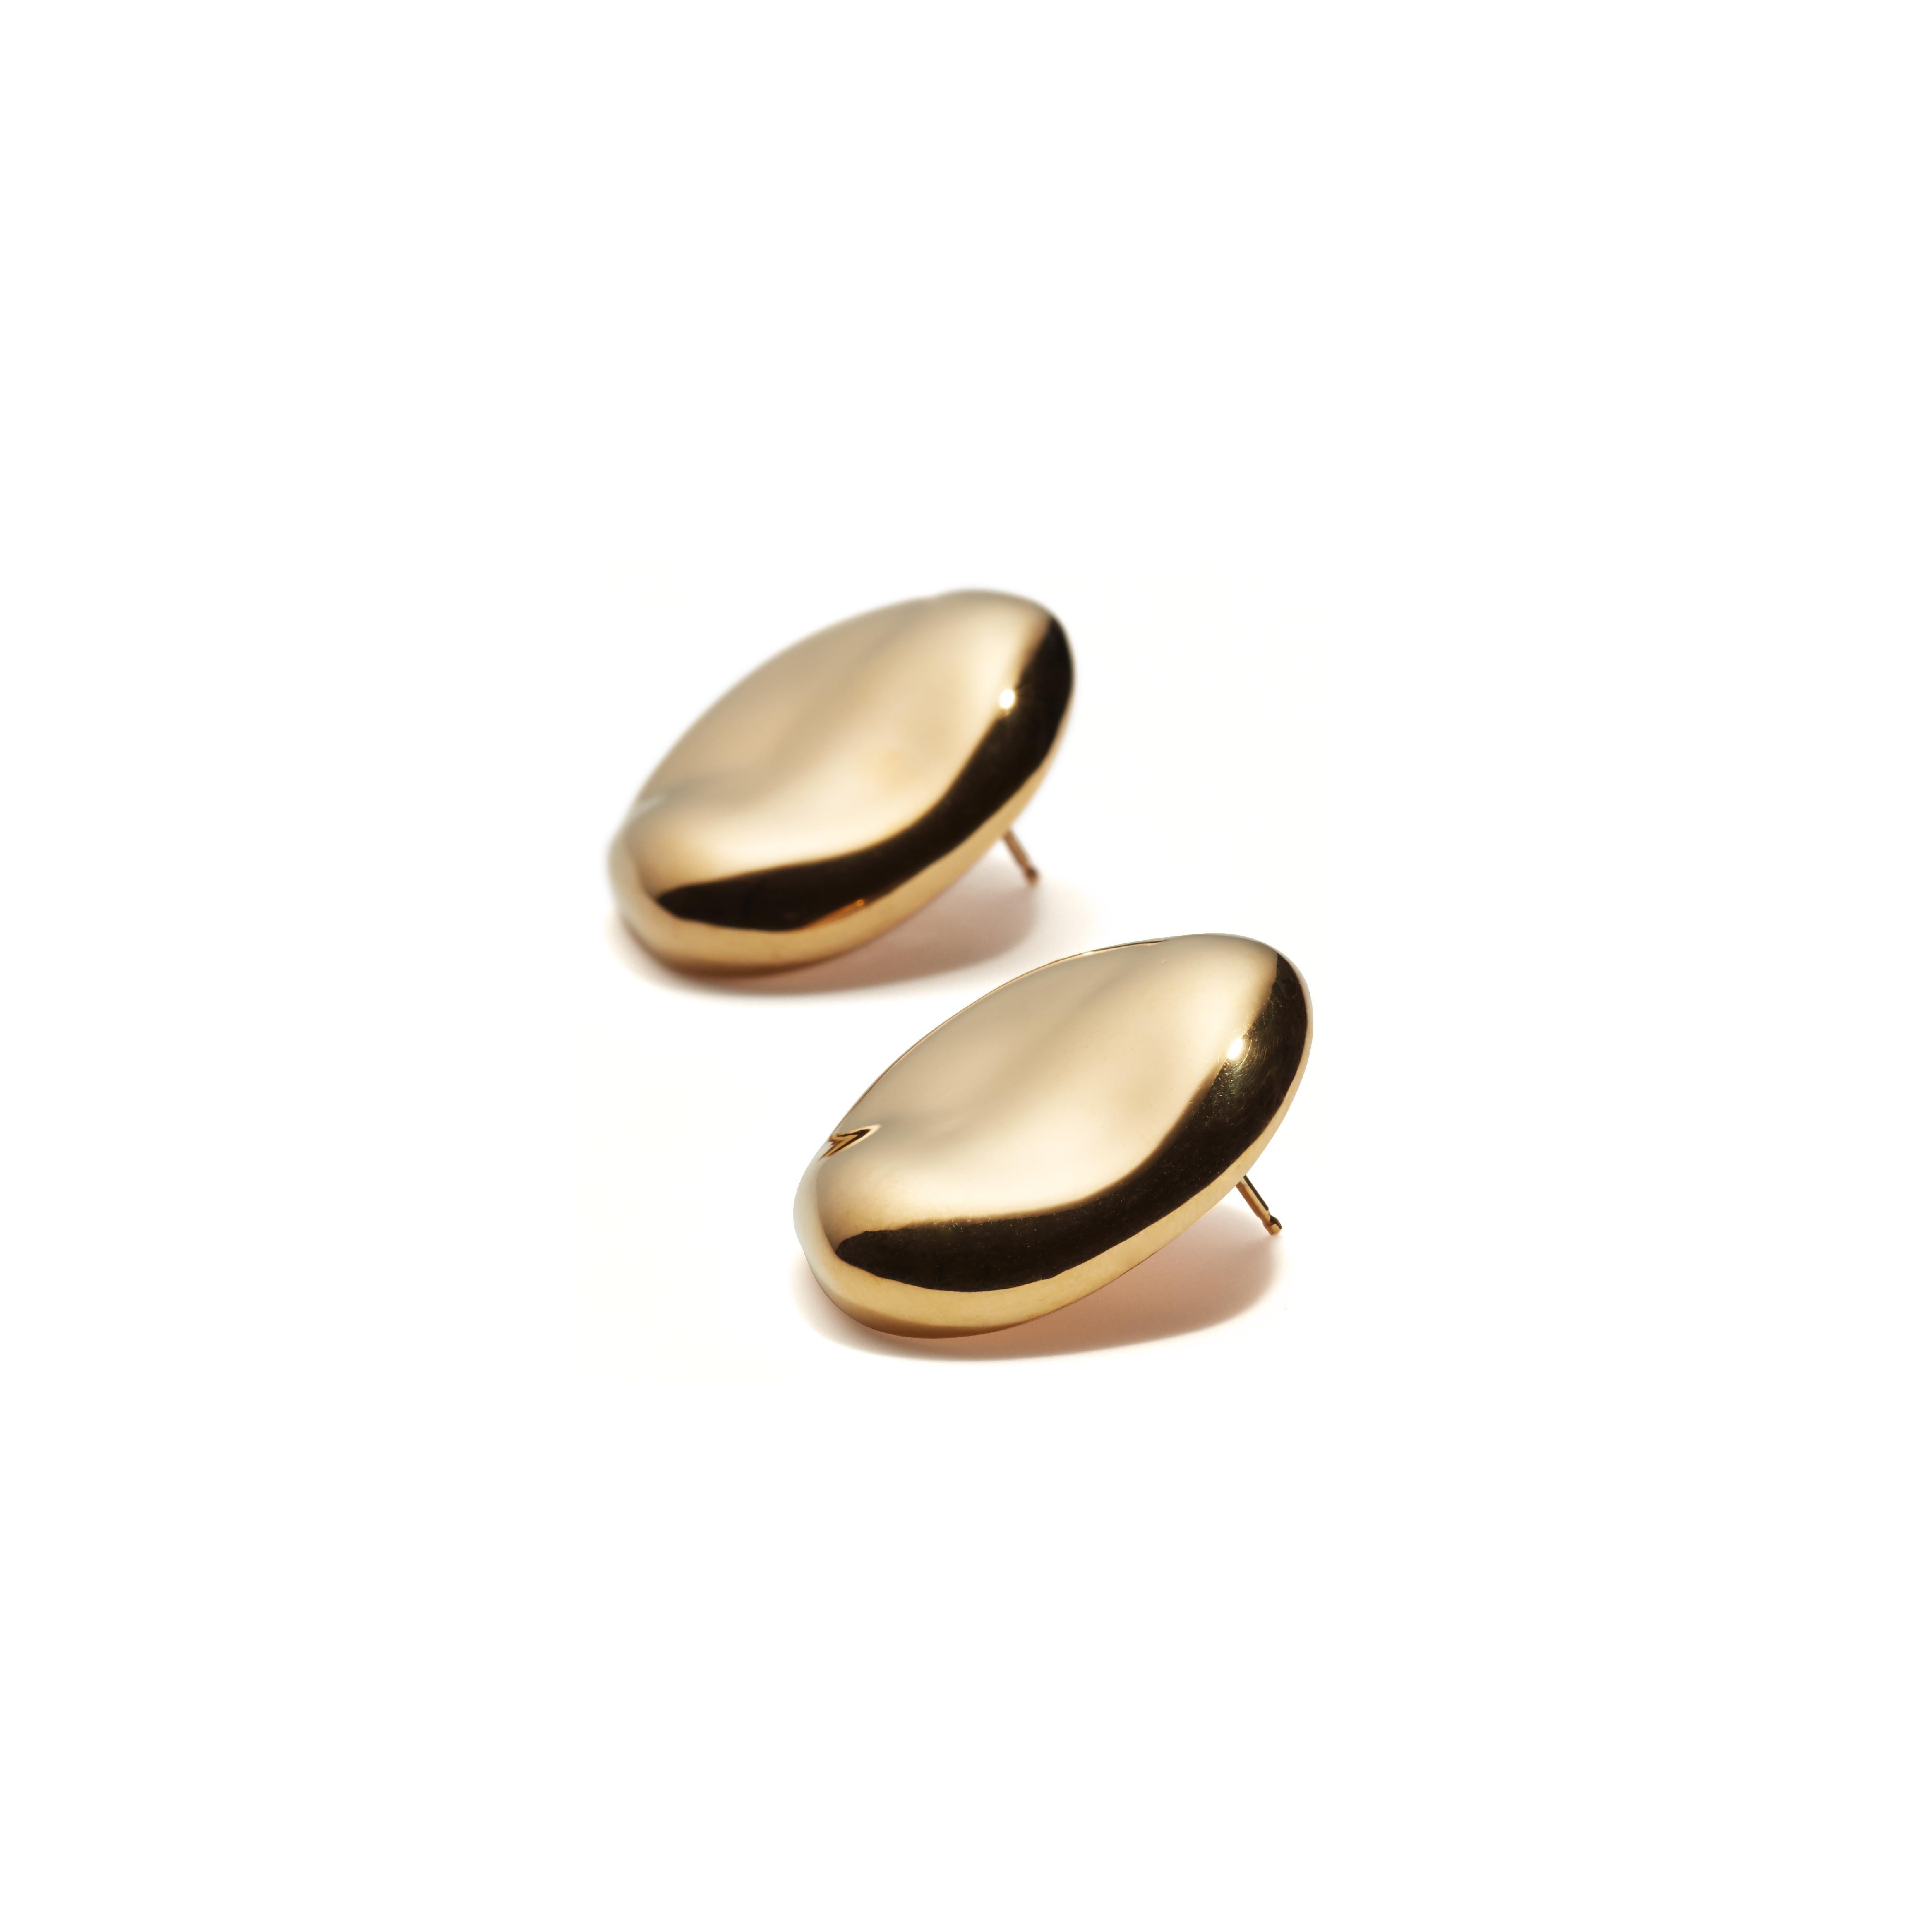 AGMES Gold Vermeil Large Organic Shape Statement Stud Earrings.
Sterling Silver post.
Handmade in NYC.  
Inspired by urban landscapes, architecture and modern art, the collection creates a feminine geometry expressed through clean lines and